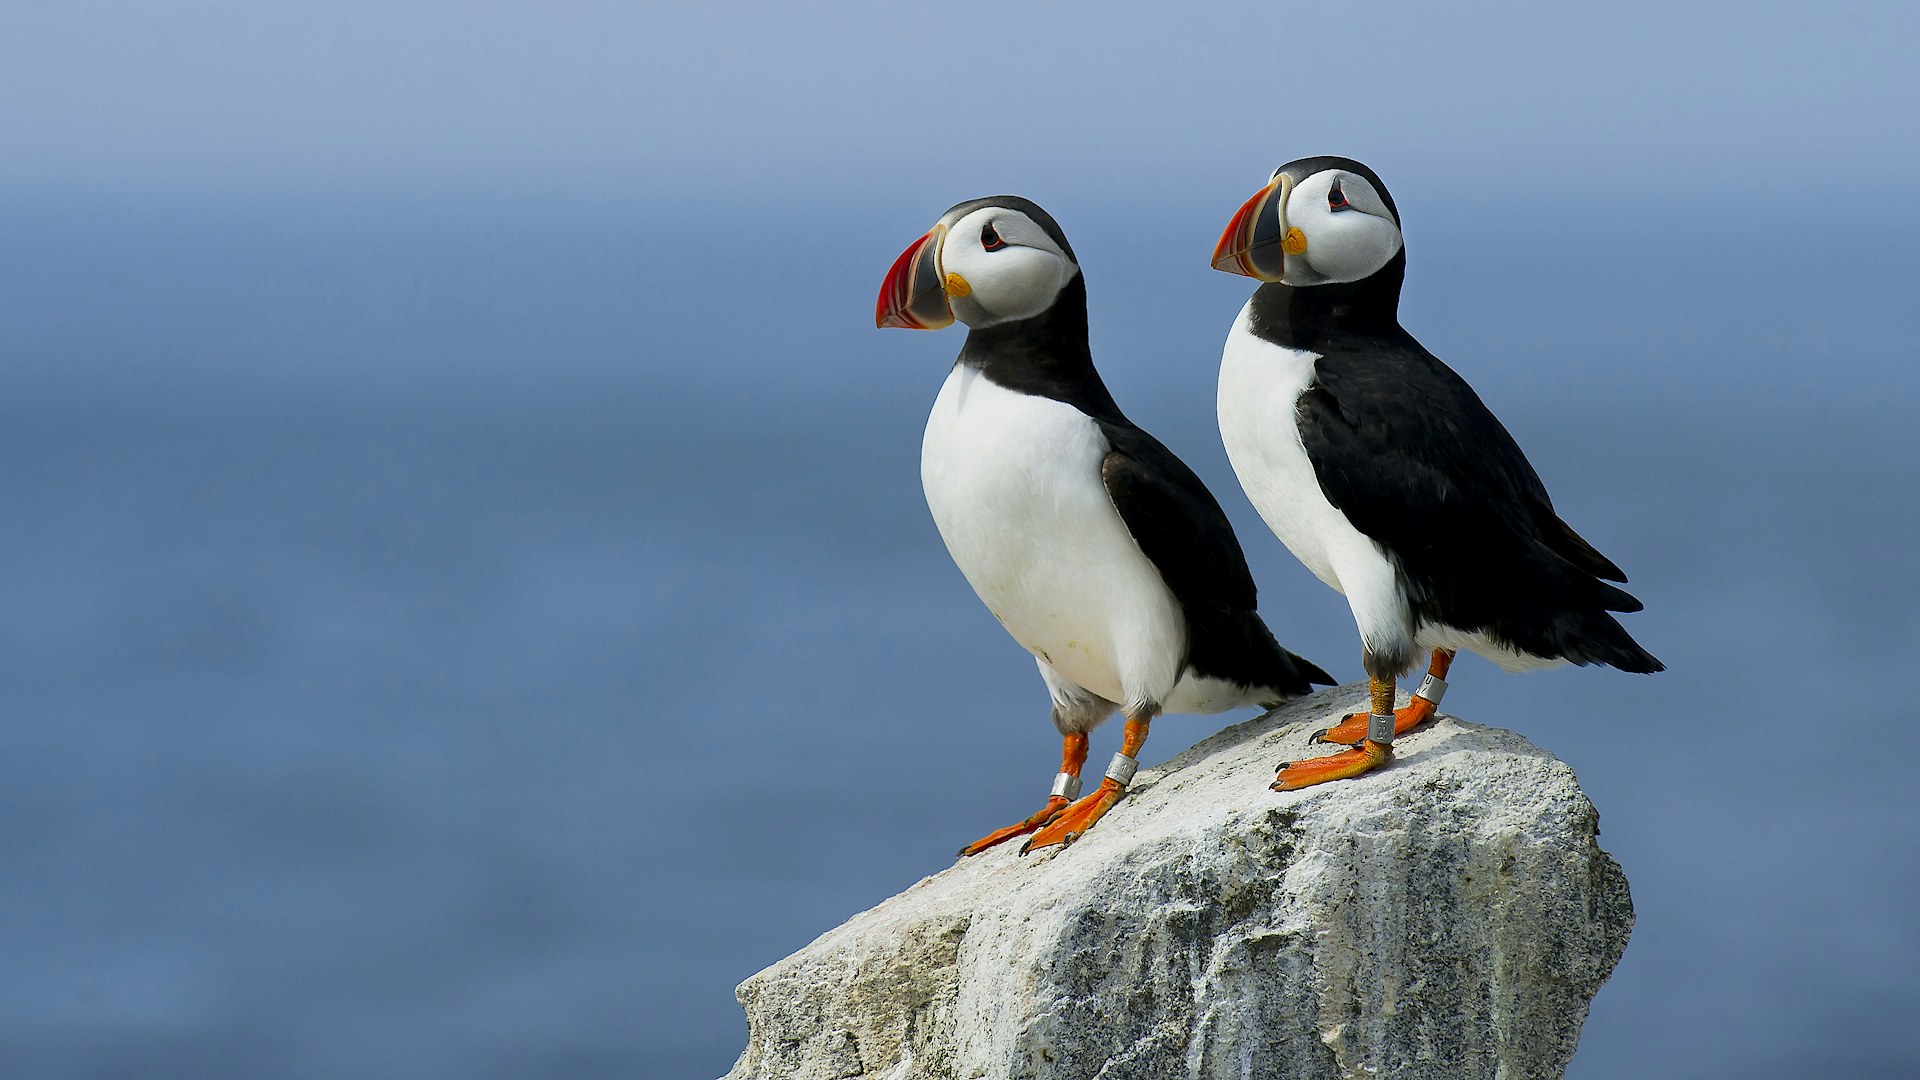 Two puffins standing on a rock in front of the ocean